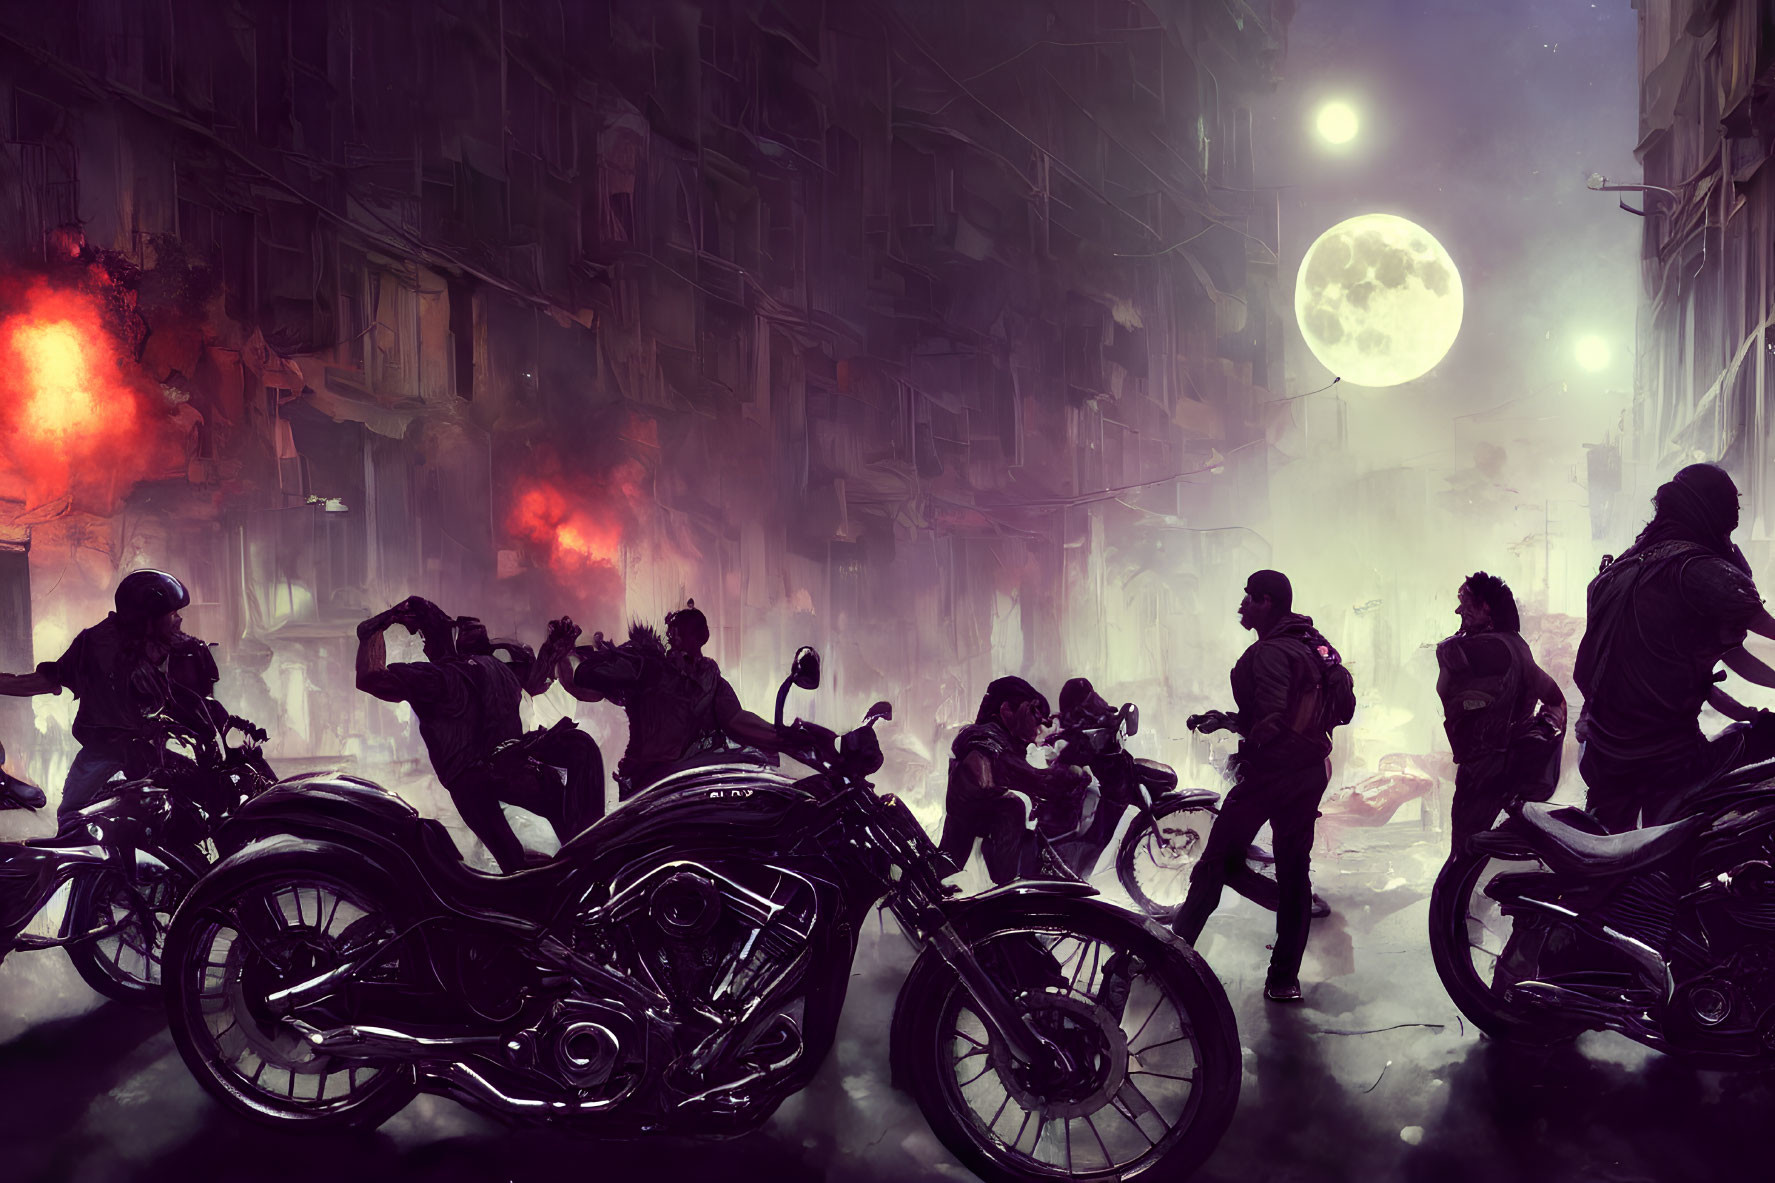 Group of people on motorcycles in foggy urban night scene under full moon